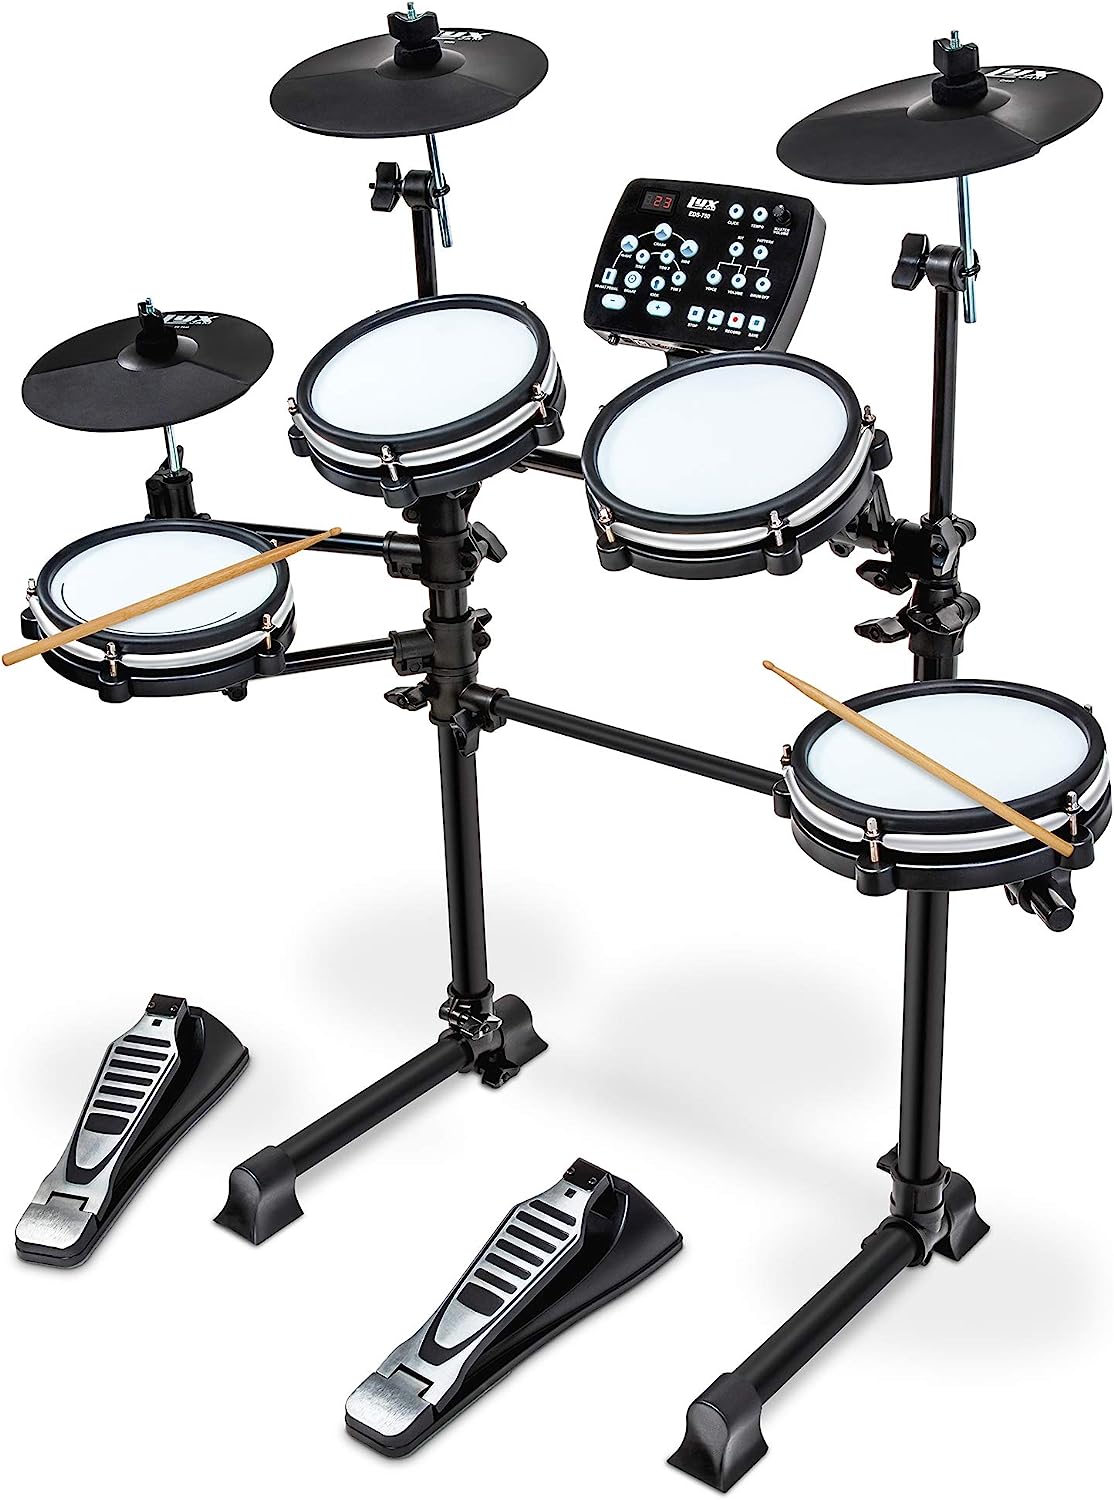 LyxPro Electronic Drum Set, Professional Drum Set with Real Mesh Fabric and Play Along Songs